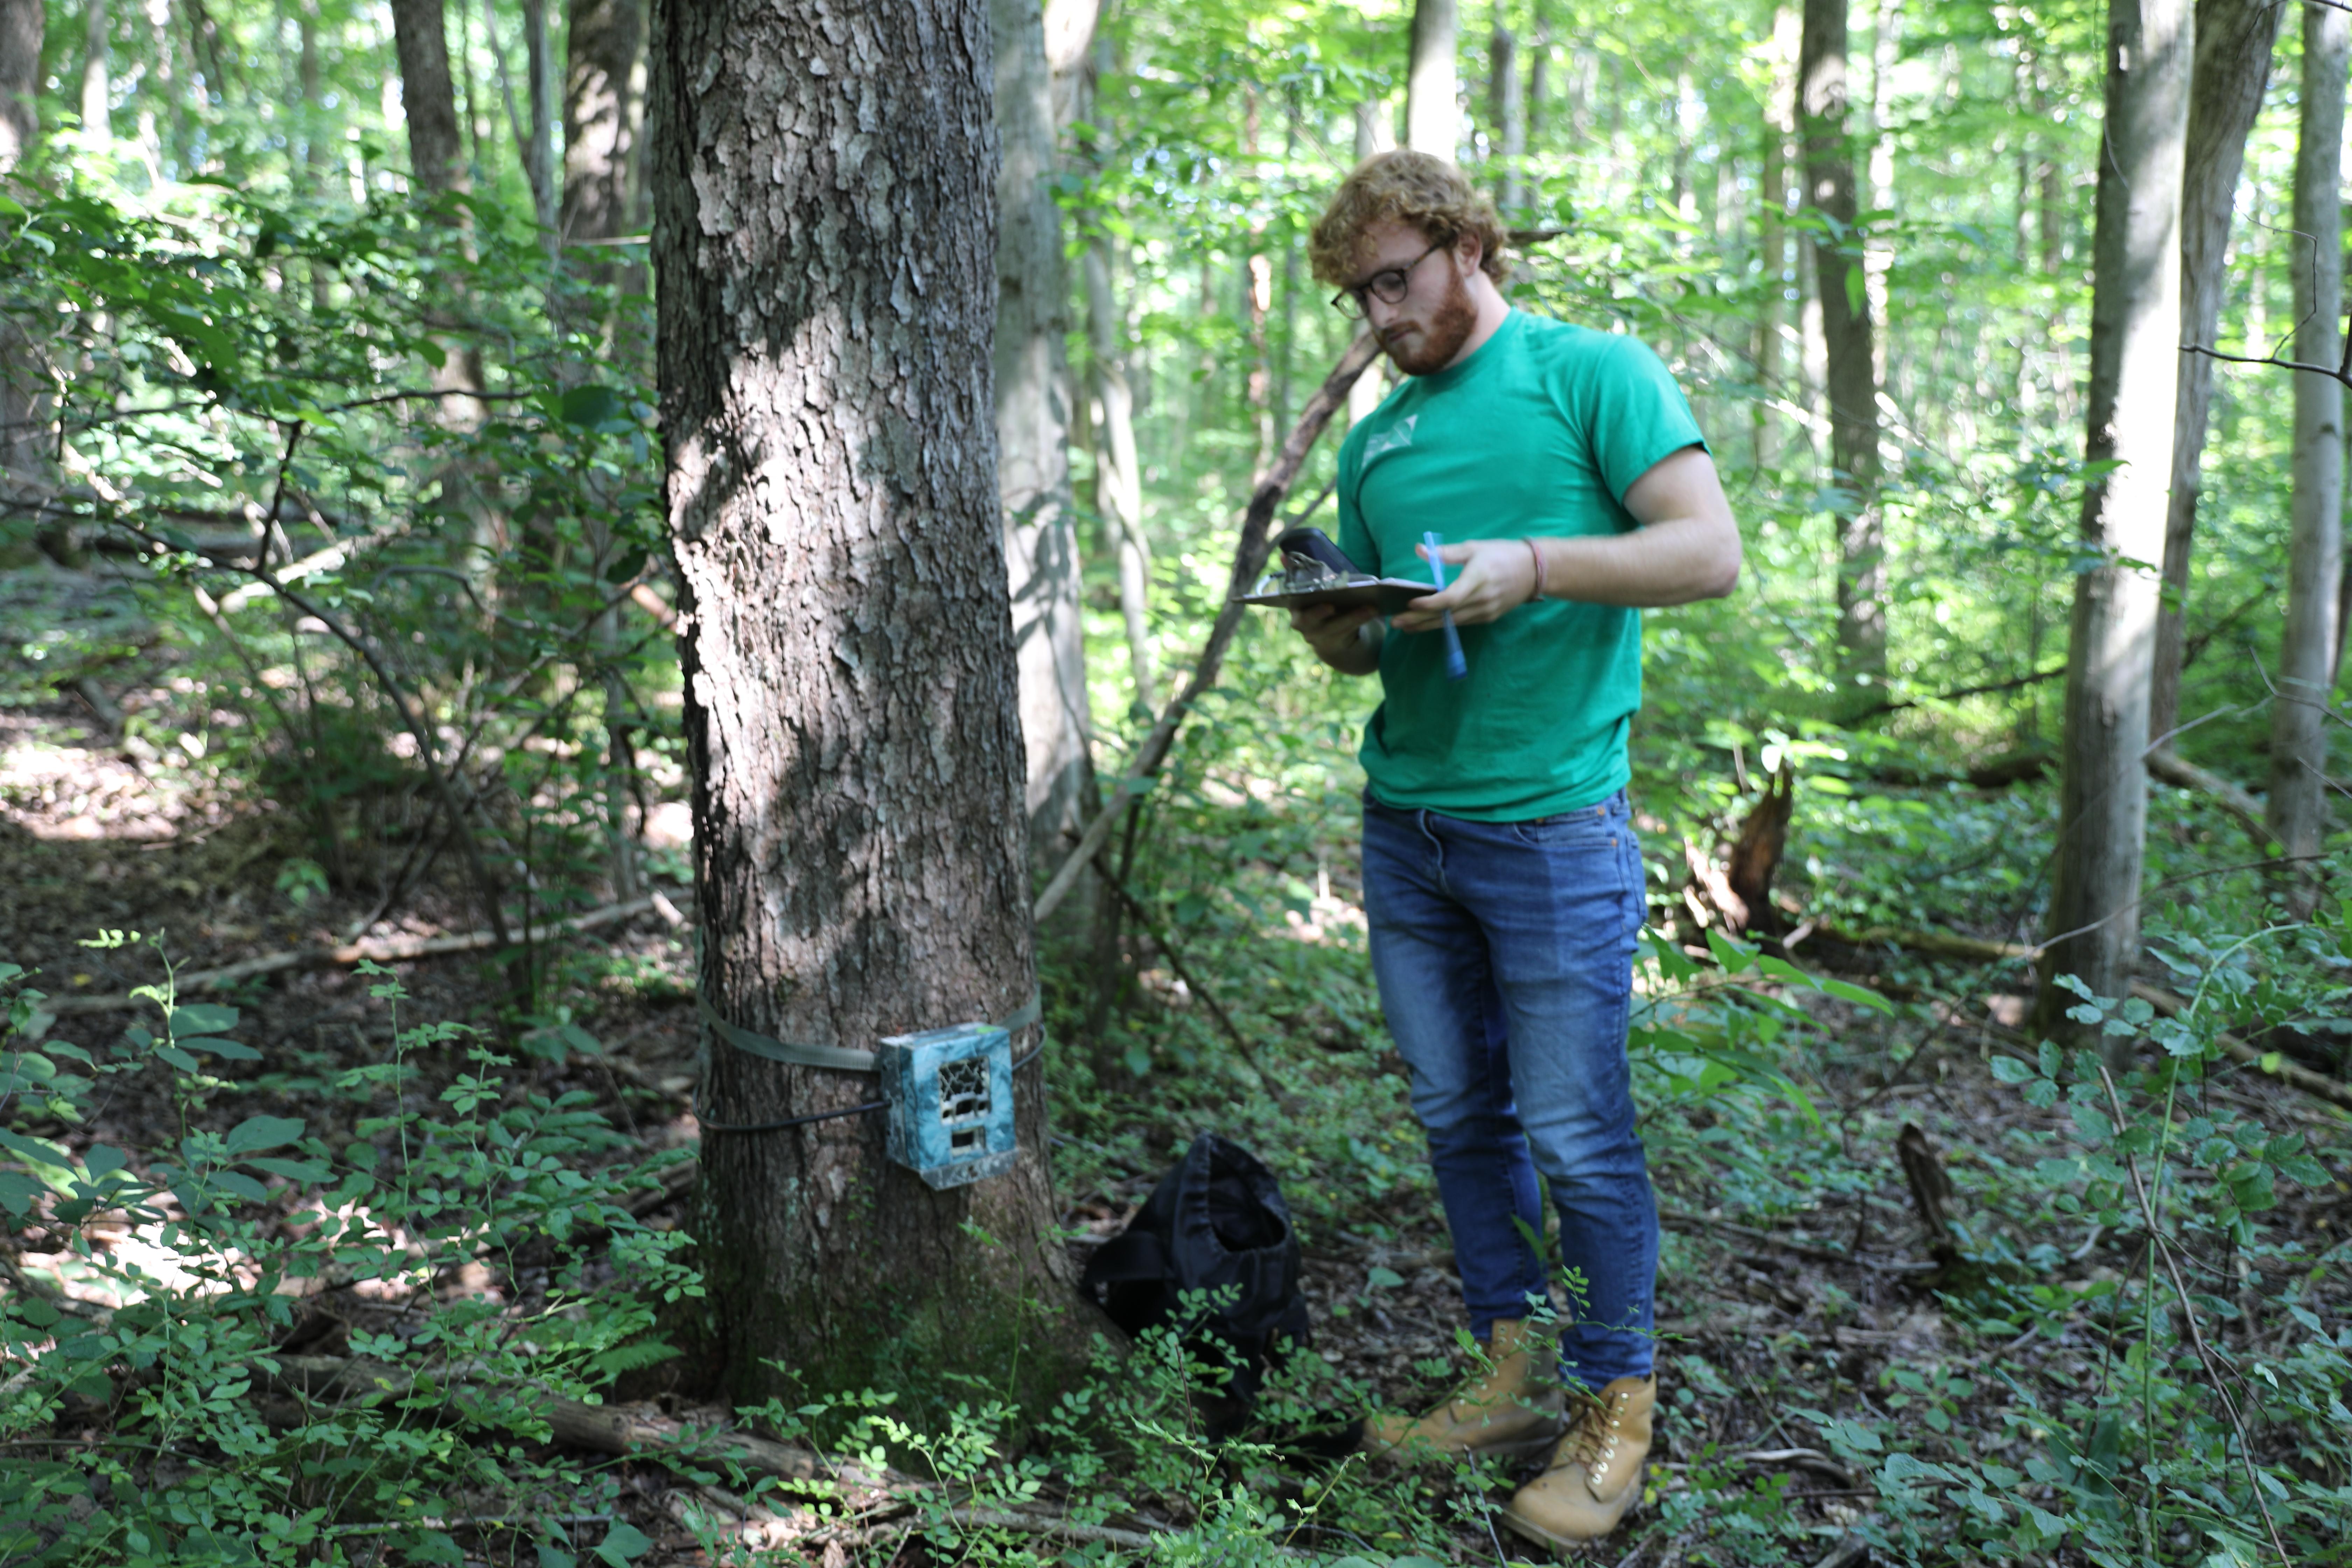 Student attaches a trails camera to a tree at the Nature Center